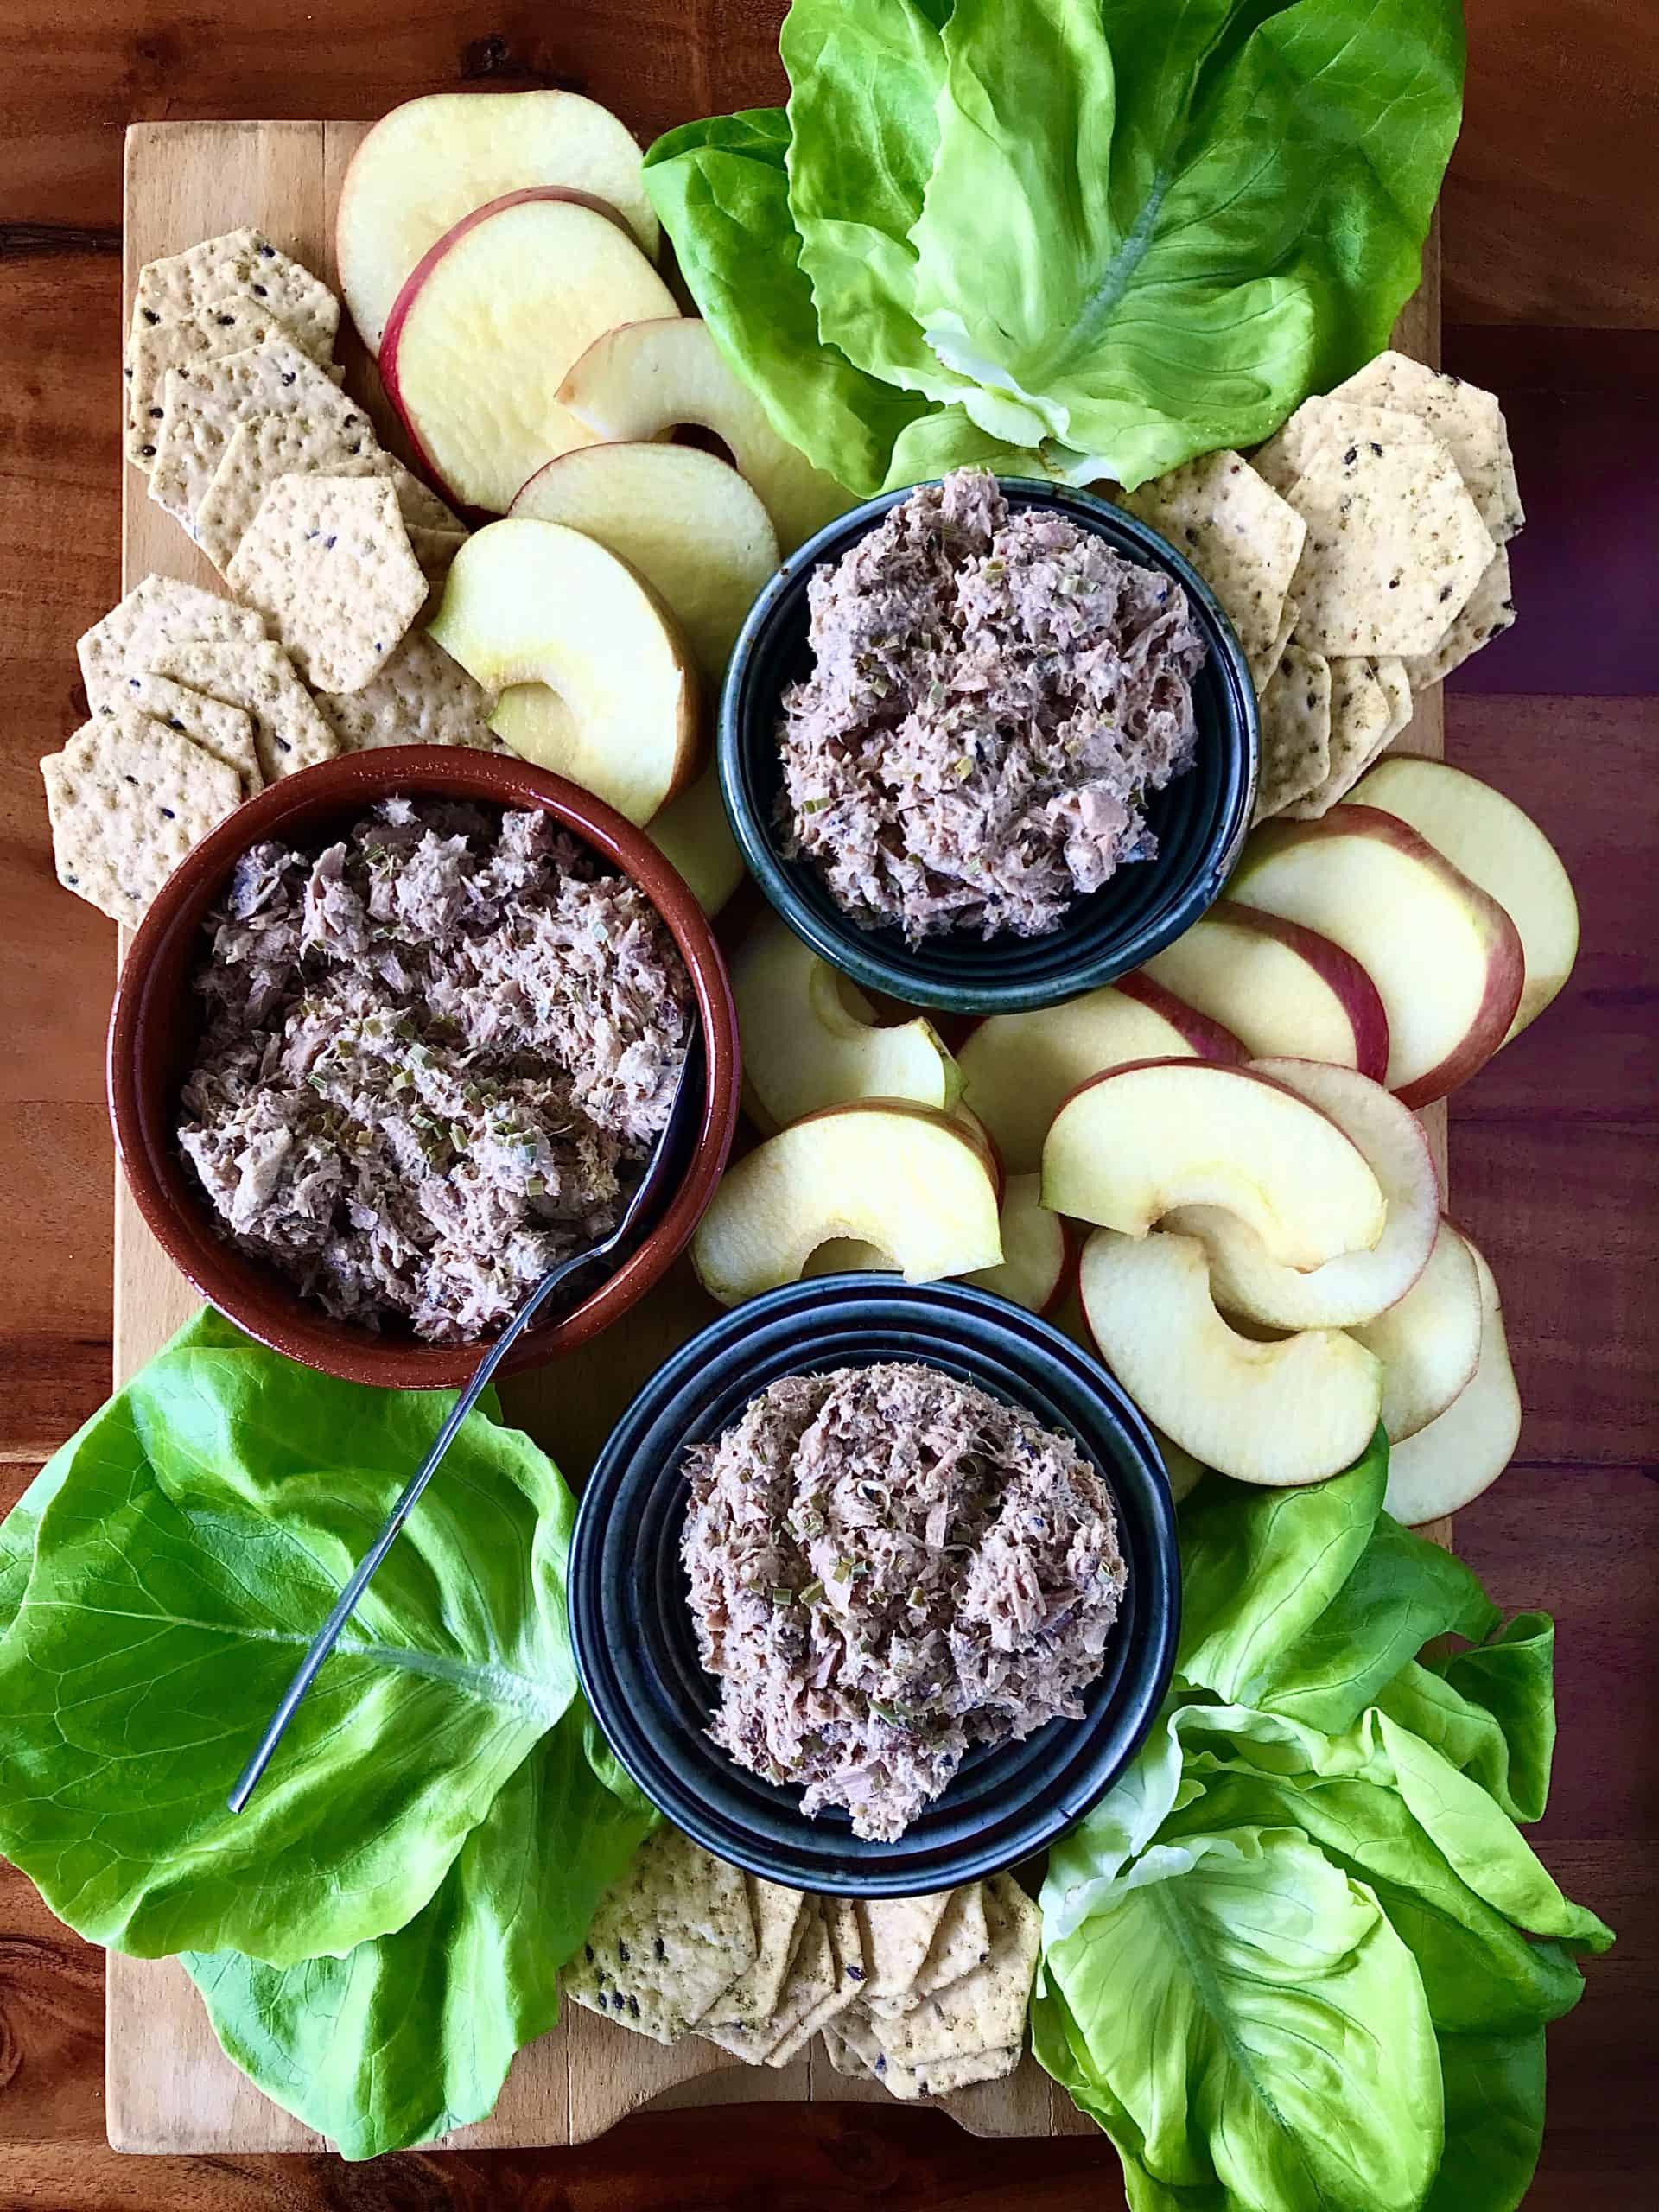 Tuna Sardine Salad on a wooden board with lettuce wraps, apple slices and crackers